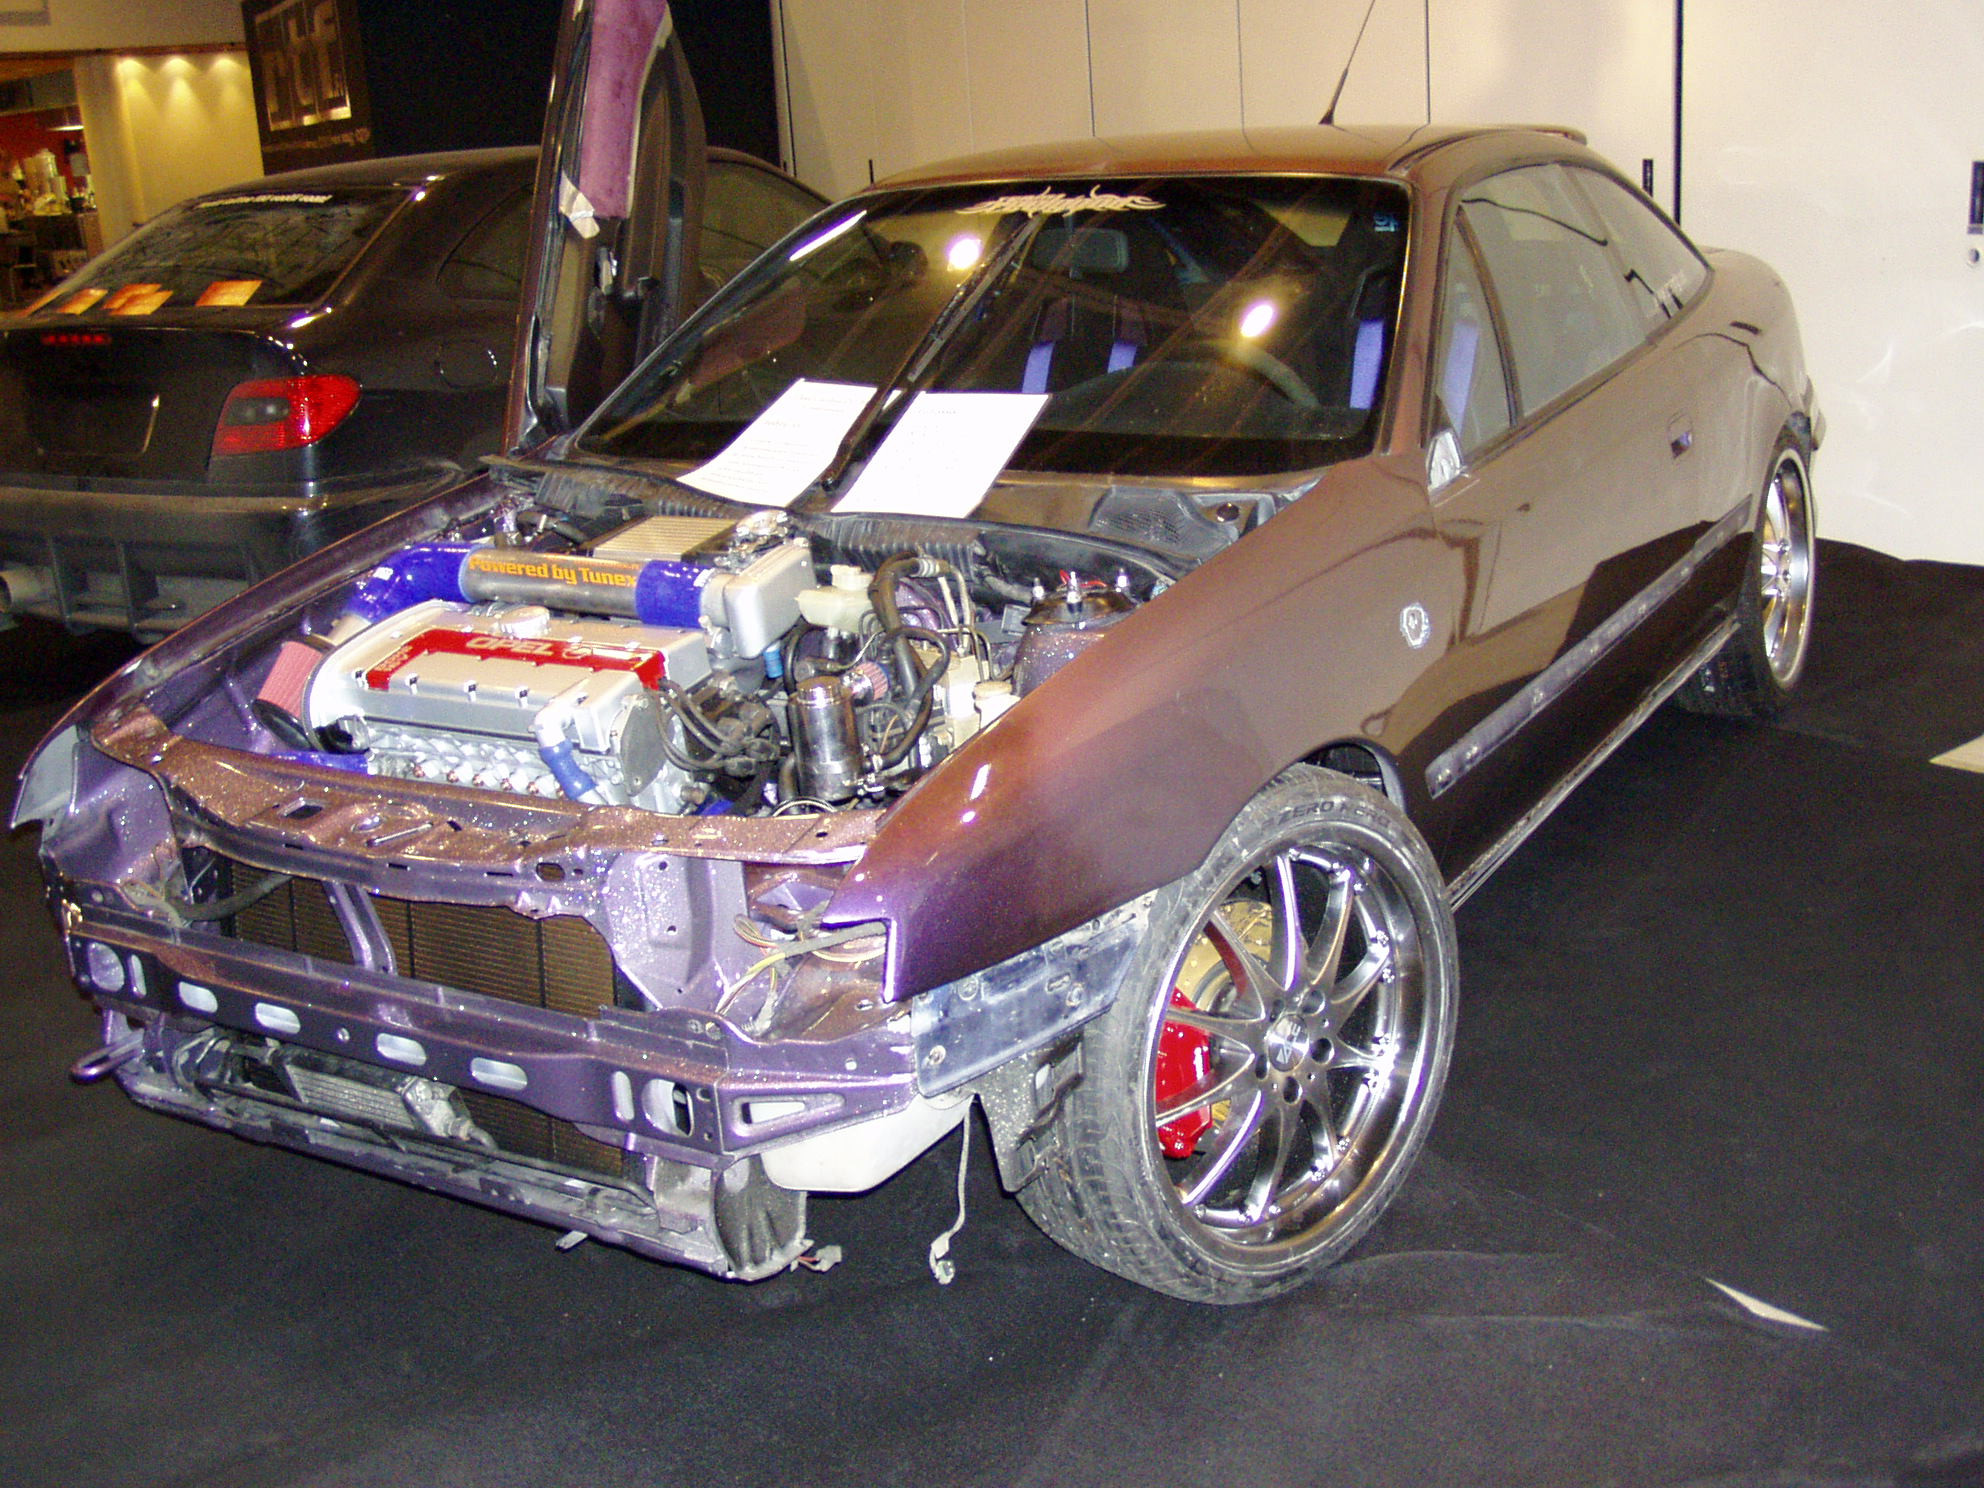 American Car Show 2005, Opel Powered by Tunex